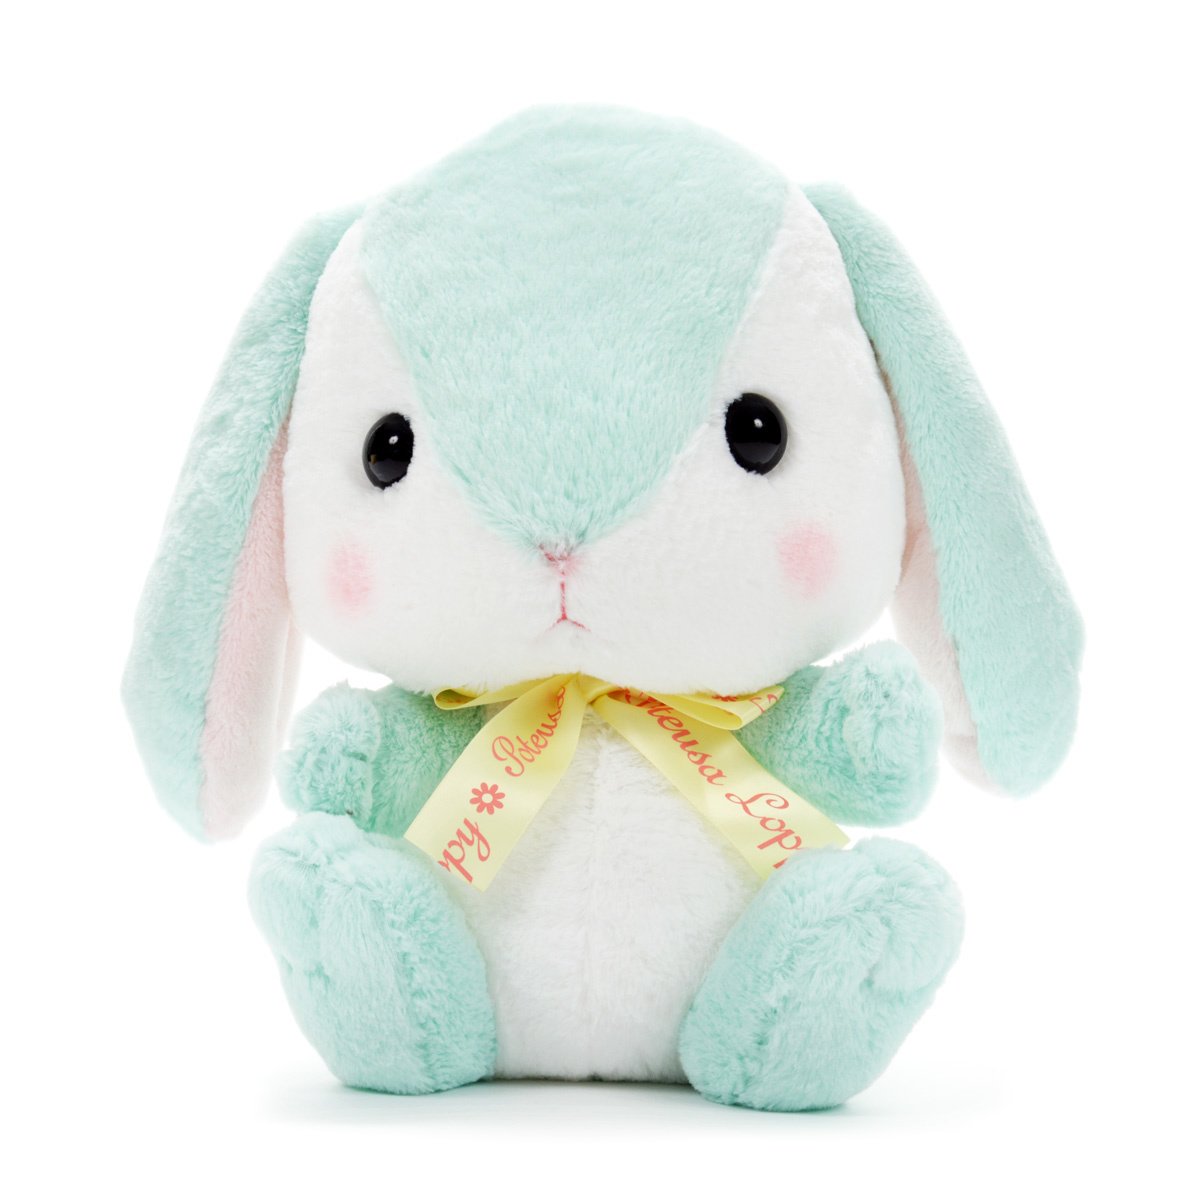 Plush Bunny, Amuse, Pote Usa Loppy, Mint-chan, Mint Green, 16 Inches